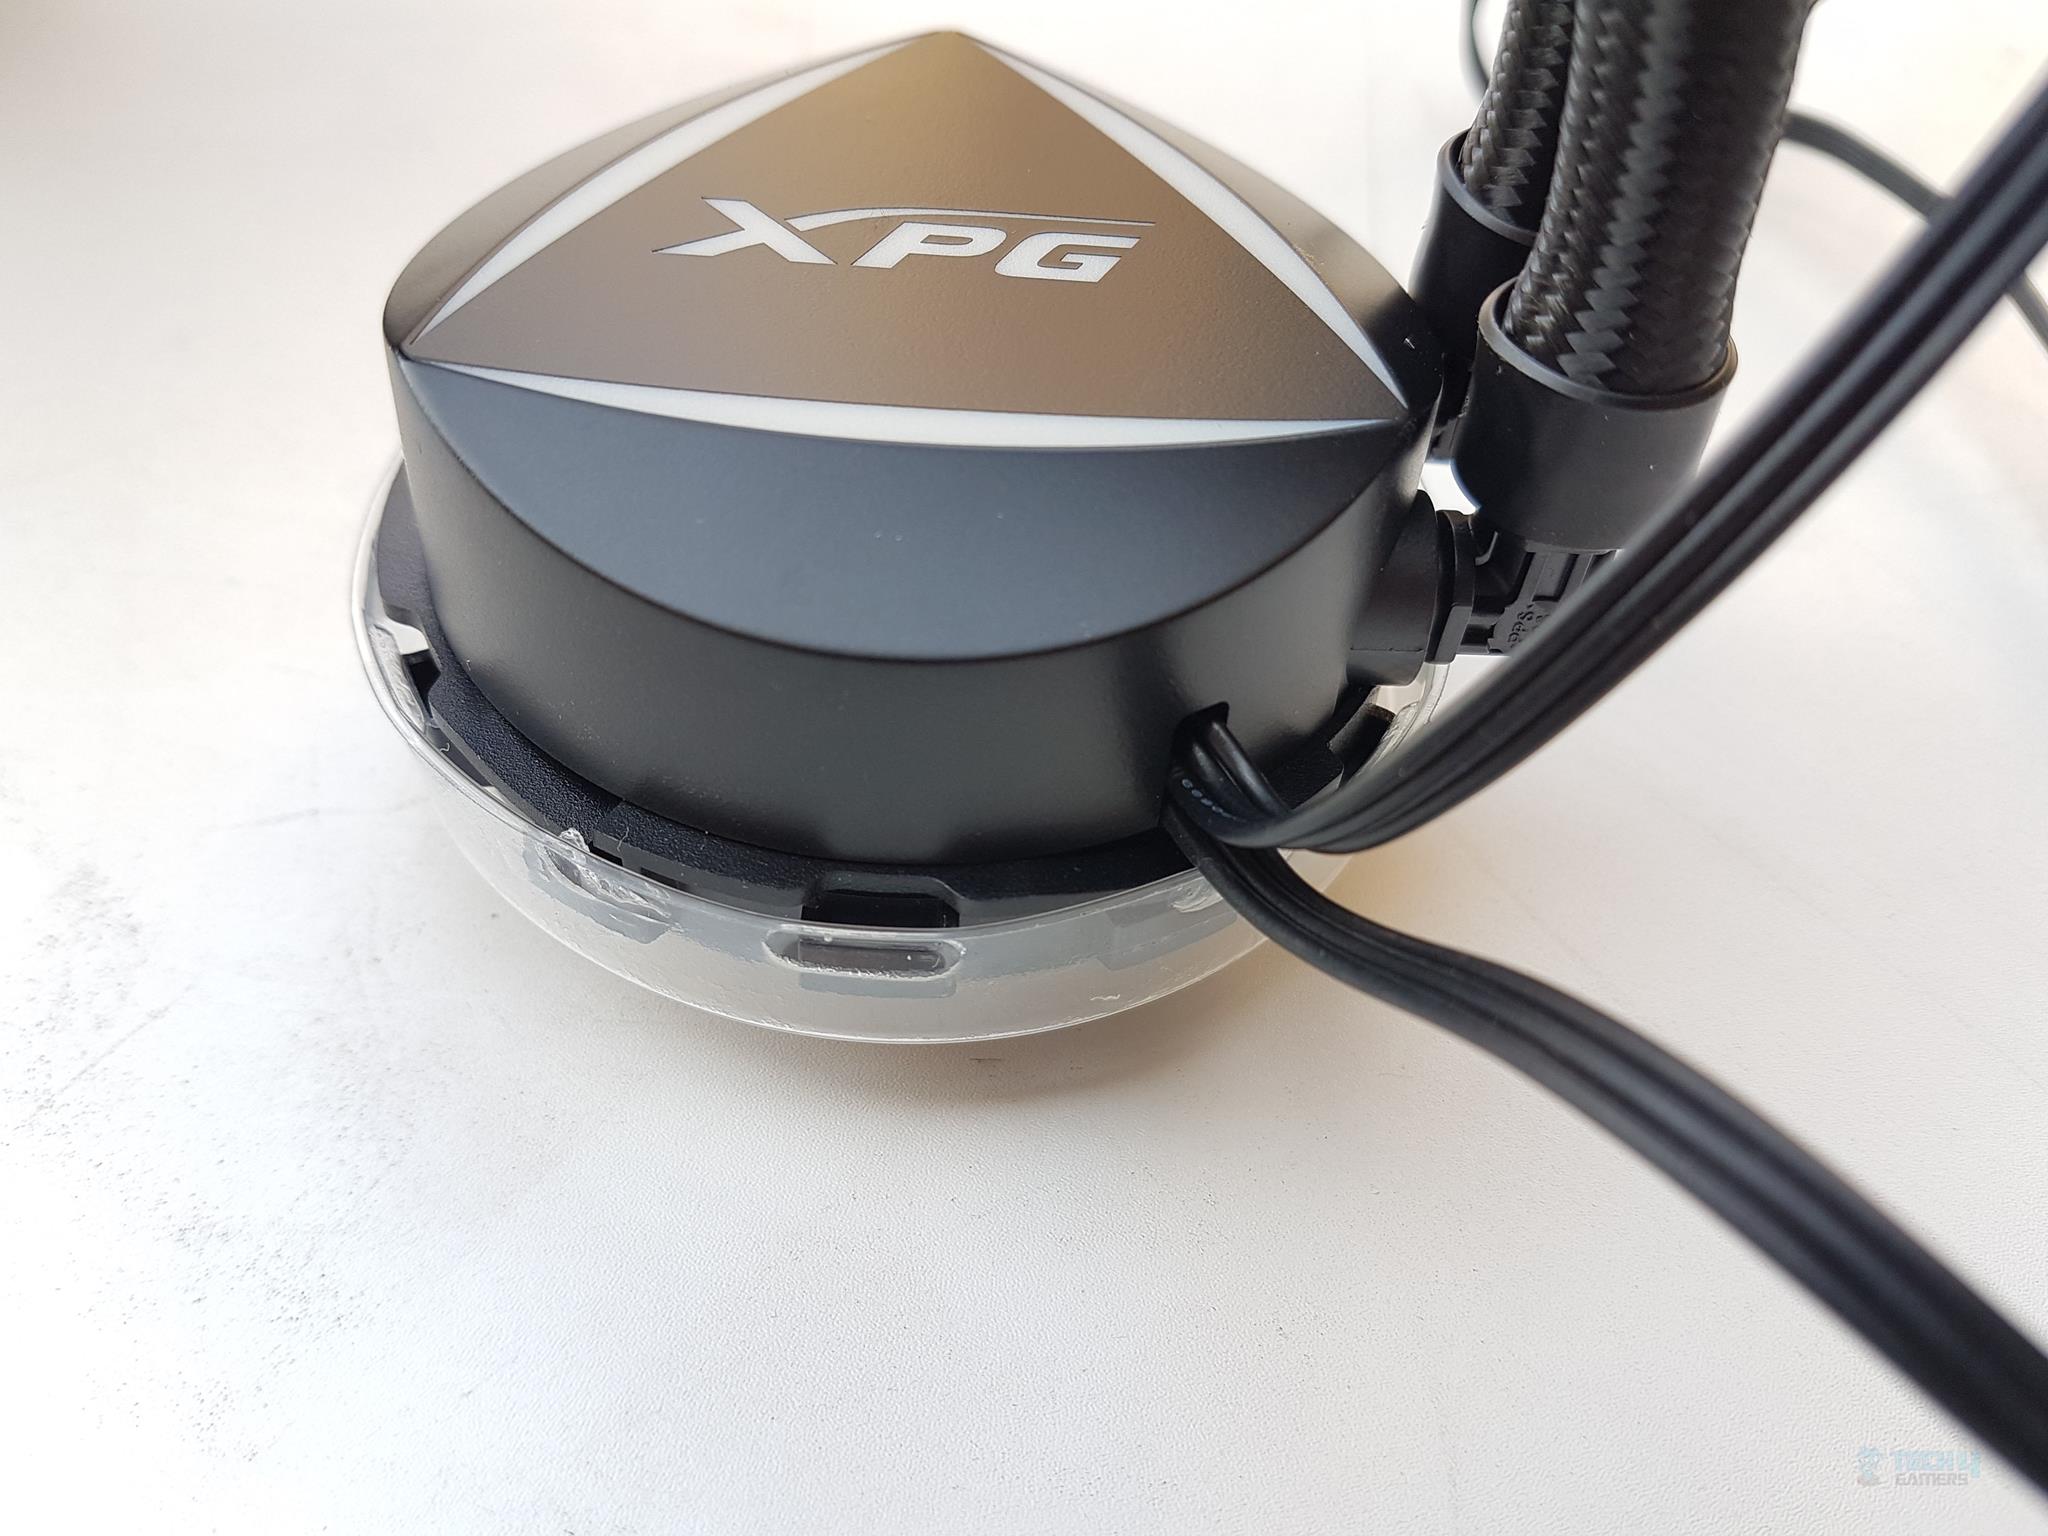 XPG Levante 240 Liquid CPU Cooler — The top section of the housing